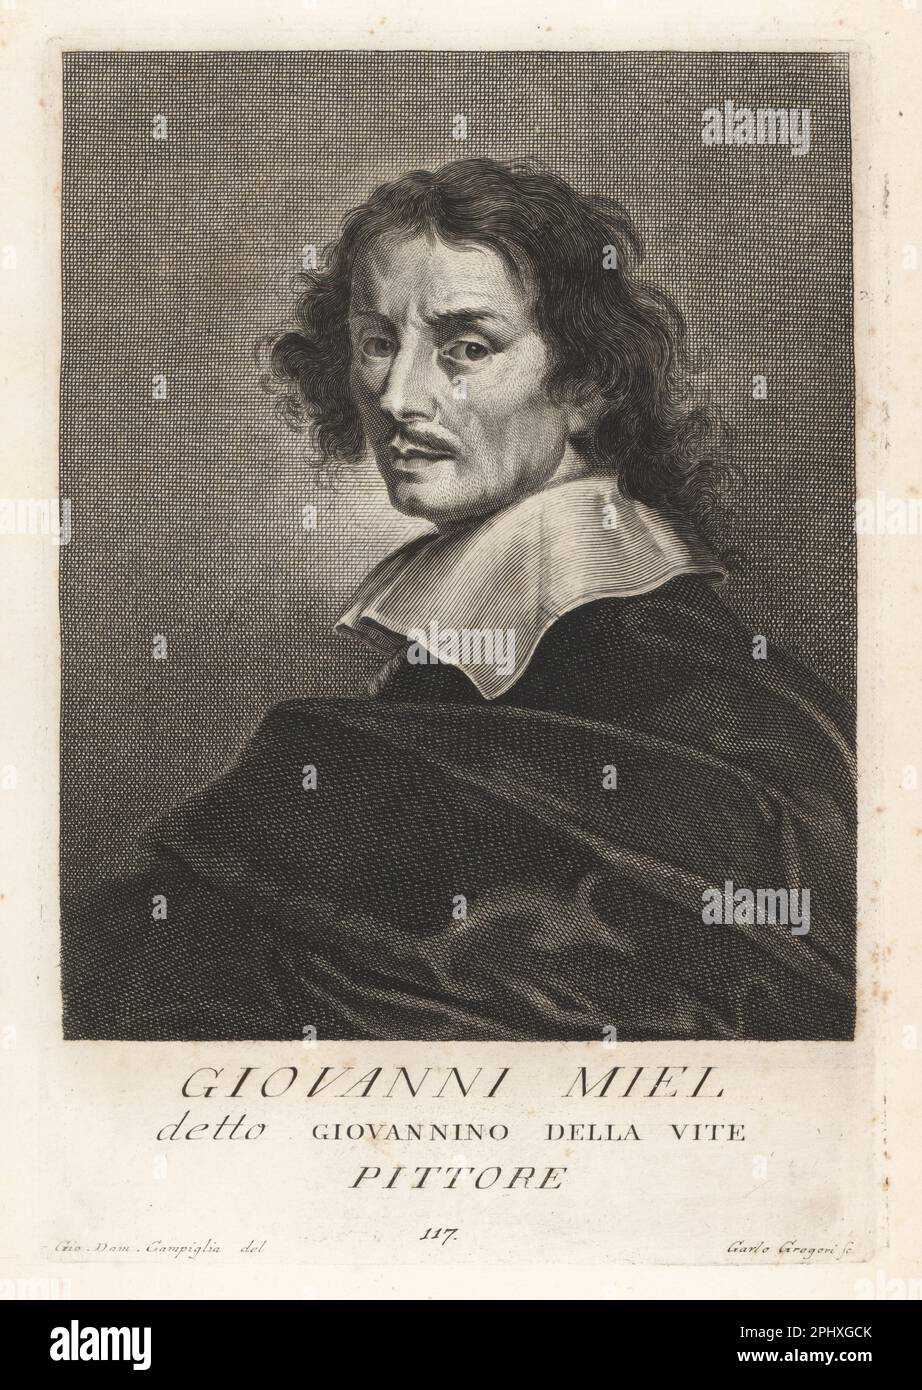 Jan Miel, Flemish painter and etcher who was active in Italy, 1599-1664. Giovanni Miel, detto Giovannino della Vite, Pittore. Copperplate engraving by Carlo Gregori after Giovanni Domenico Campiglia after a self portrait by the artist from Francesco Moucke's Museo Florentino (Museum Florentinum), Serie di Ritratti de Pittori (Series of Portraits of Painters) stamperia Mouckiana, Florence, 1752-62. Stock Photo